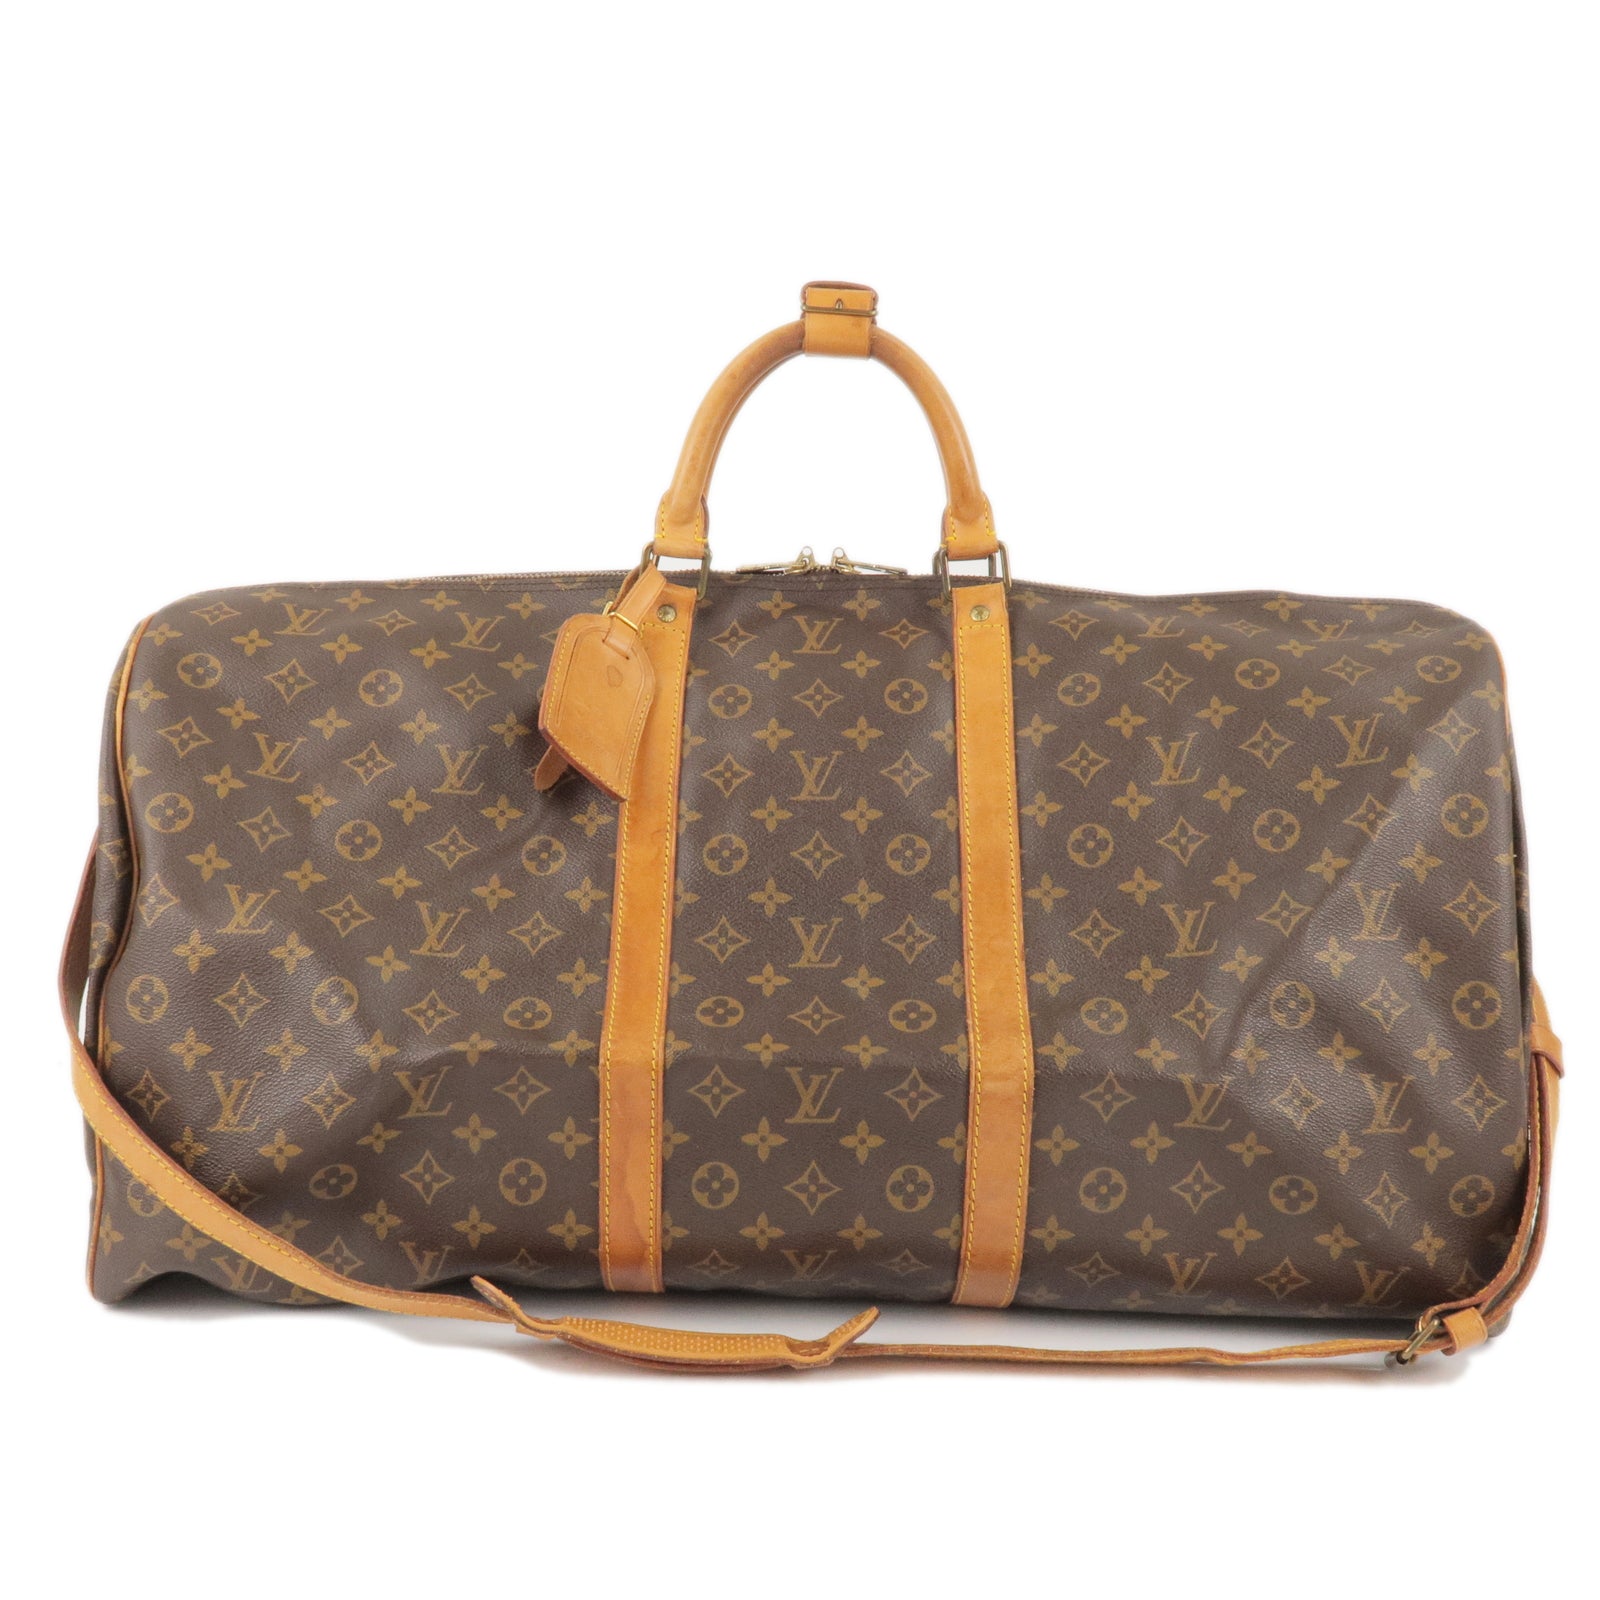 Louis Vuitton, Bags, Authentic Louis Vuitton Keepall 5 Duffle Wluggage Tag  Poignet